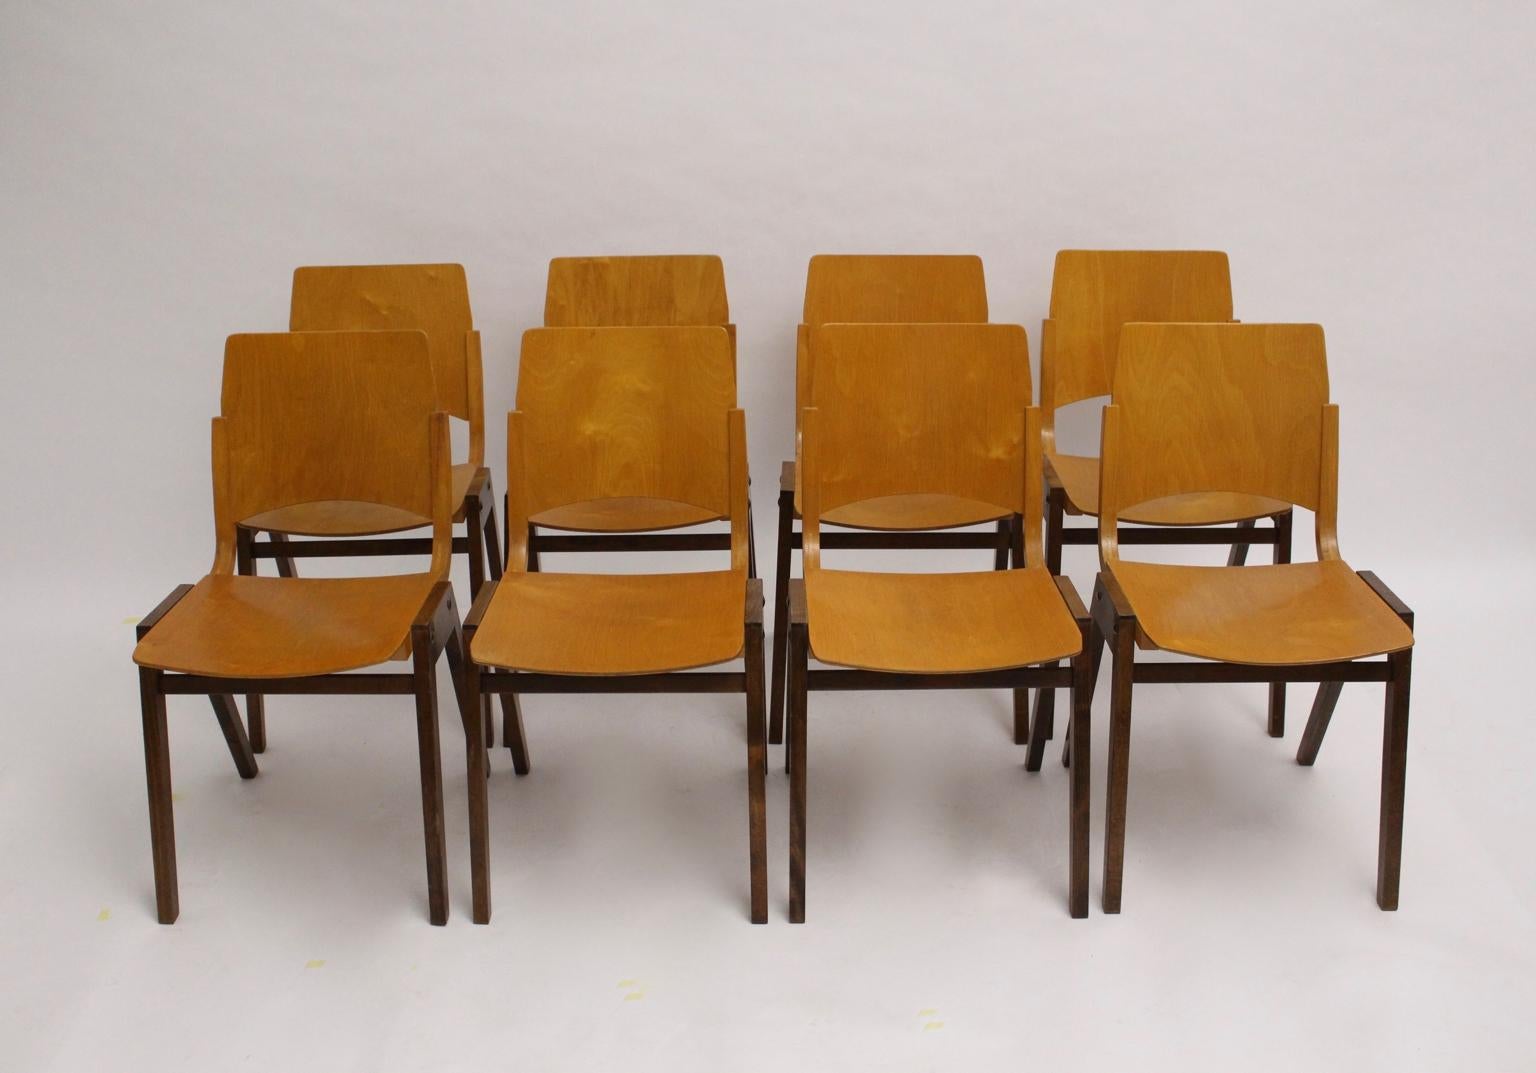 Mid Century Modern timeless set of eight vintage dining room chairs model P7 from beech designed by Roland Rainer for the Viennese Stadthalle 1952 and executed by Emil & Alfred Pollak Vienna.
These chairs were used and designed for the stage area of